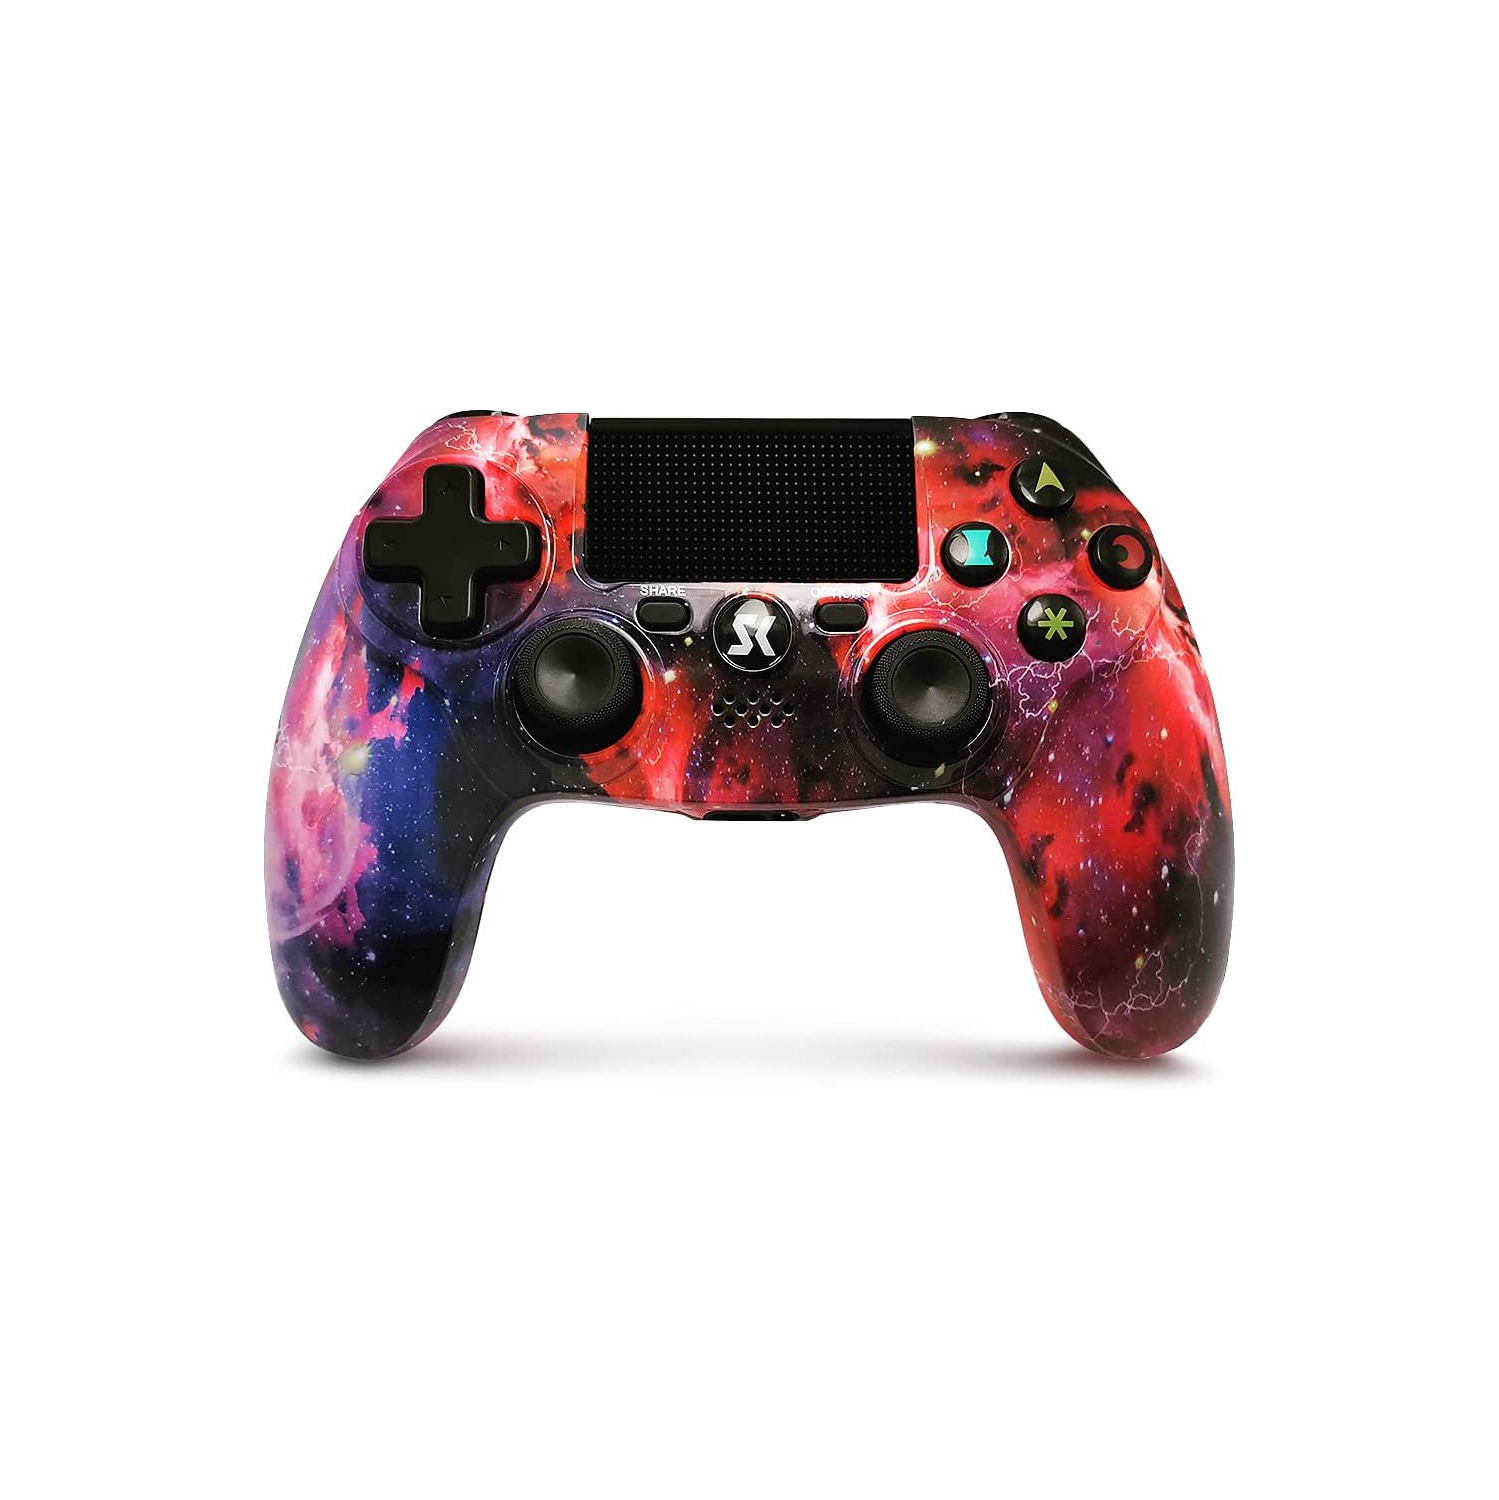 Wireless Controller for PS4, Red Galaxy Series Dual Vibration Gaming Controller for Playstation 4/Pro/Slim/PC with Audio Function,LED Bar, Motion Control